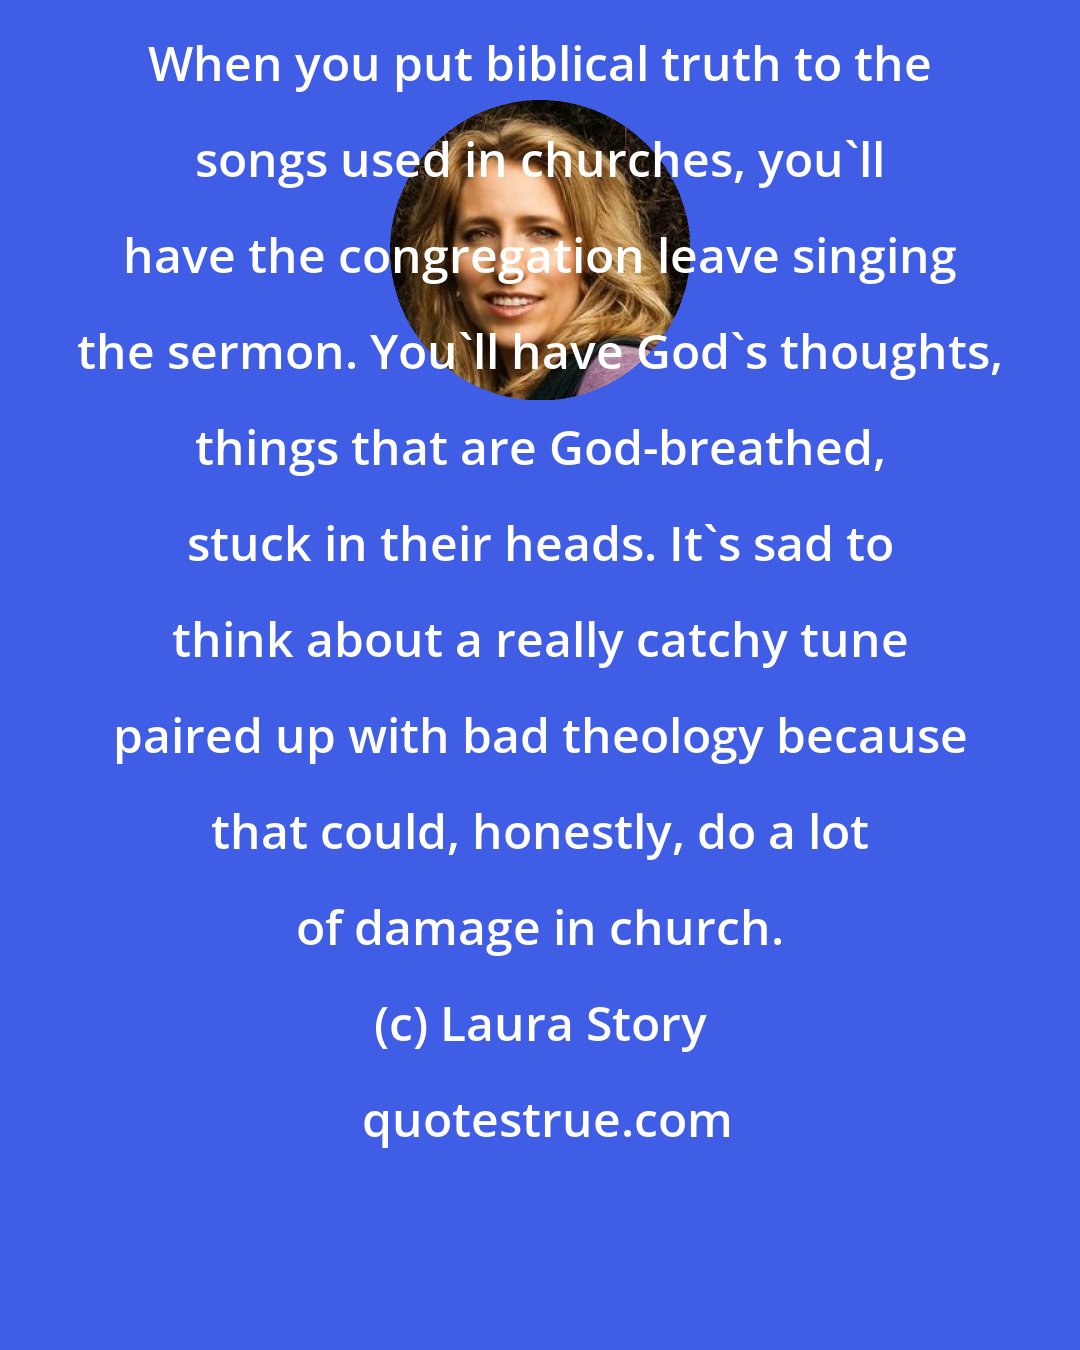 Laura Story: When you put biblical truth to the songs used in churches, you'll have the congregation leave singing the sermon. You'll have God's thoughts, things that are God-breathed, stuck in their heads. It's sad to think about a really catchy tune paired up with bad theology because that could, honestly, do a lot of damage in church.